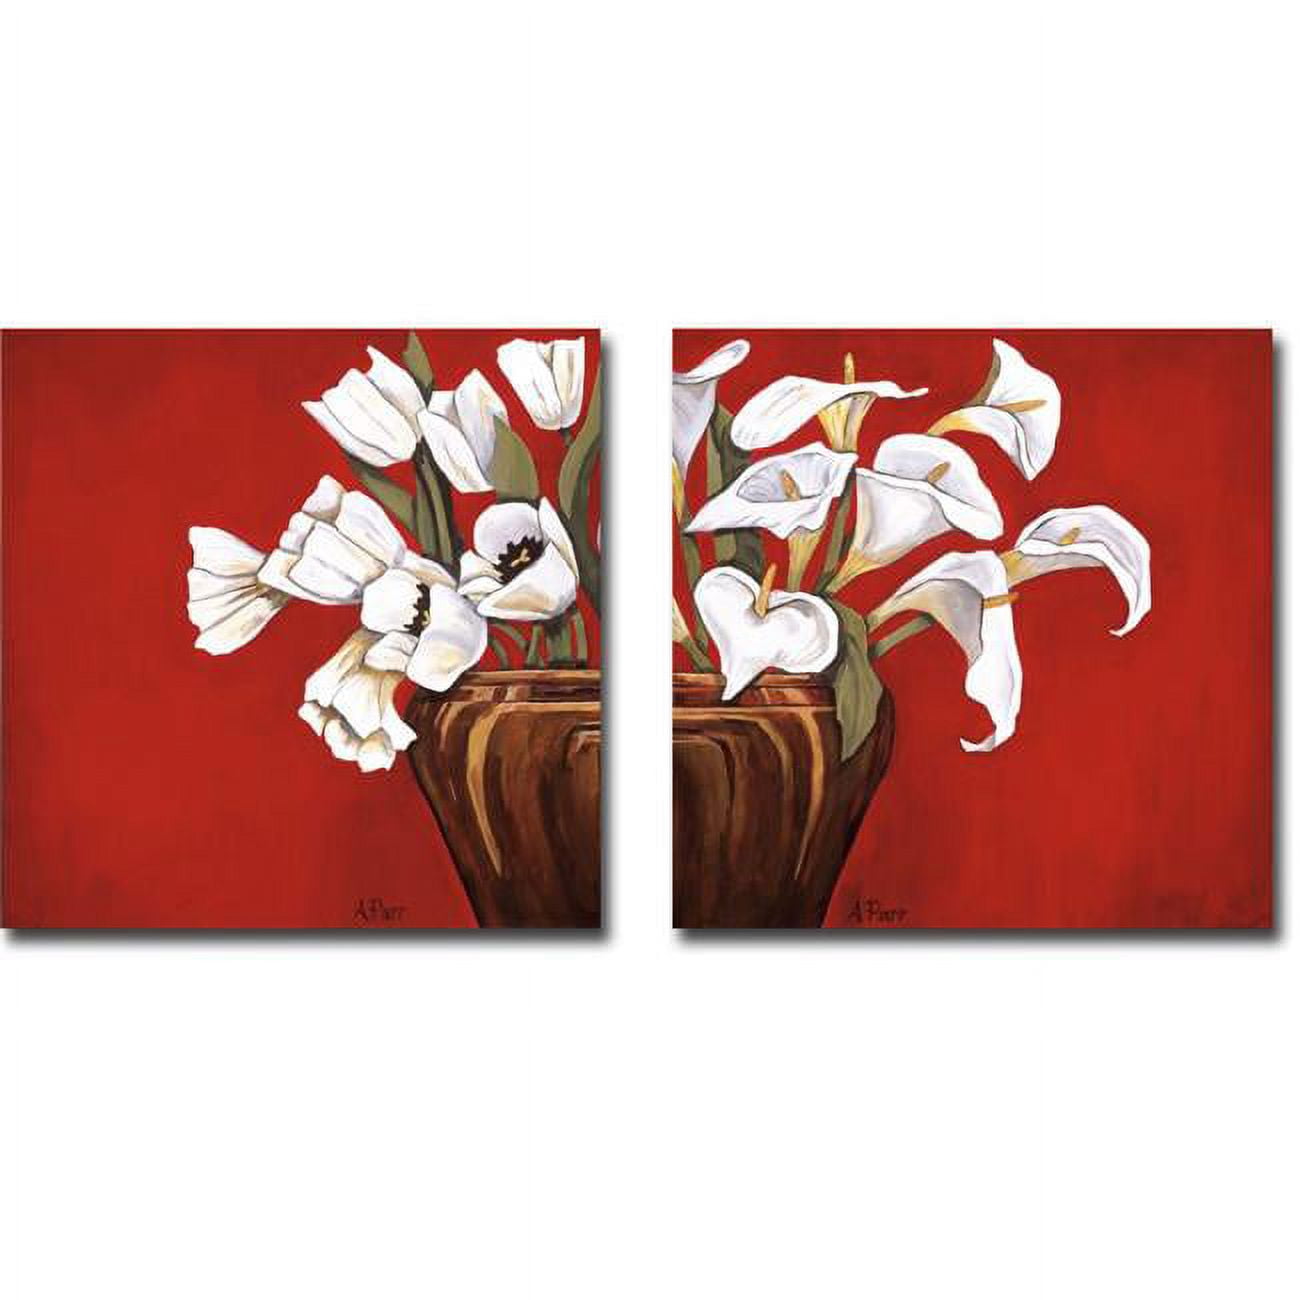 1212j818cg Tulips On Red & Callas On Red By Ann Parr 2-piece Premium Gallery-wrapped Canvas Giclee Art Set - 12 X 12 X 1.5 In.